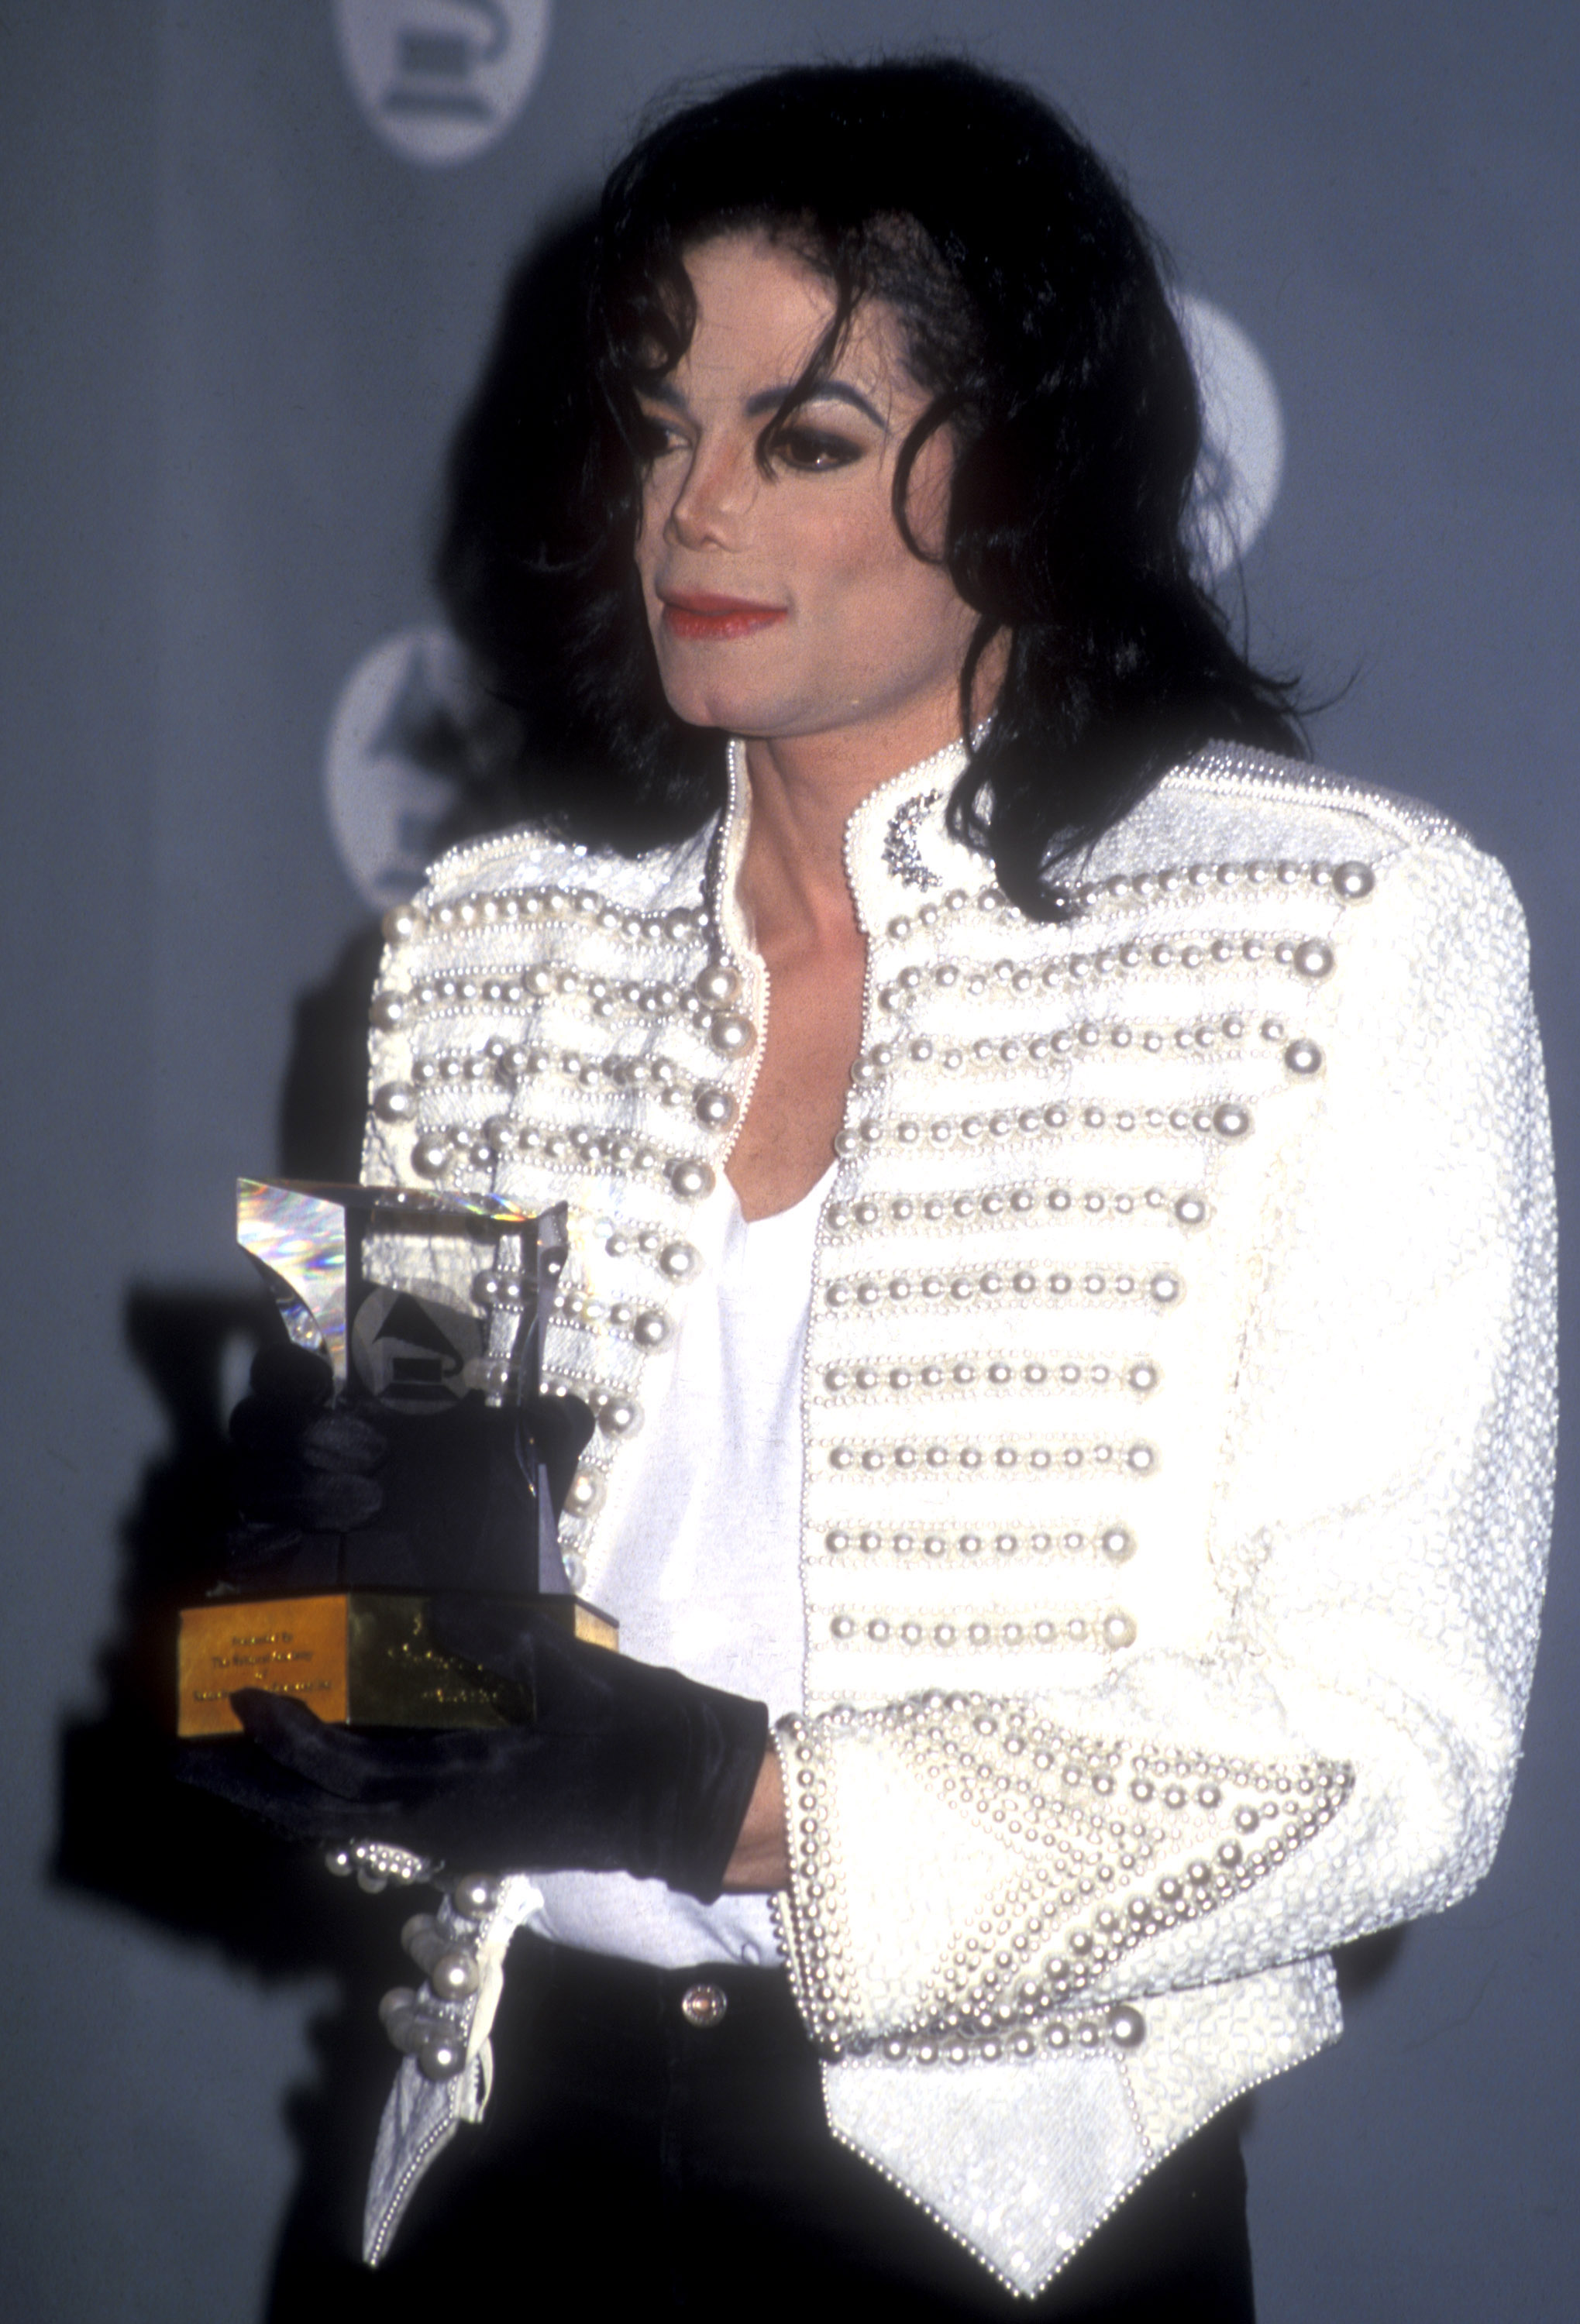 Michael Jackson at the 35th Annual GRAMMY Awards on February 24, 1993 | Source: Getty Images